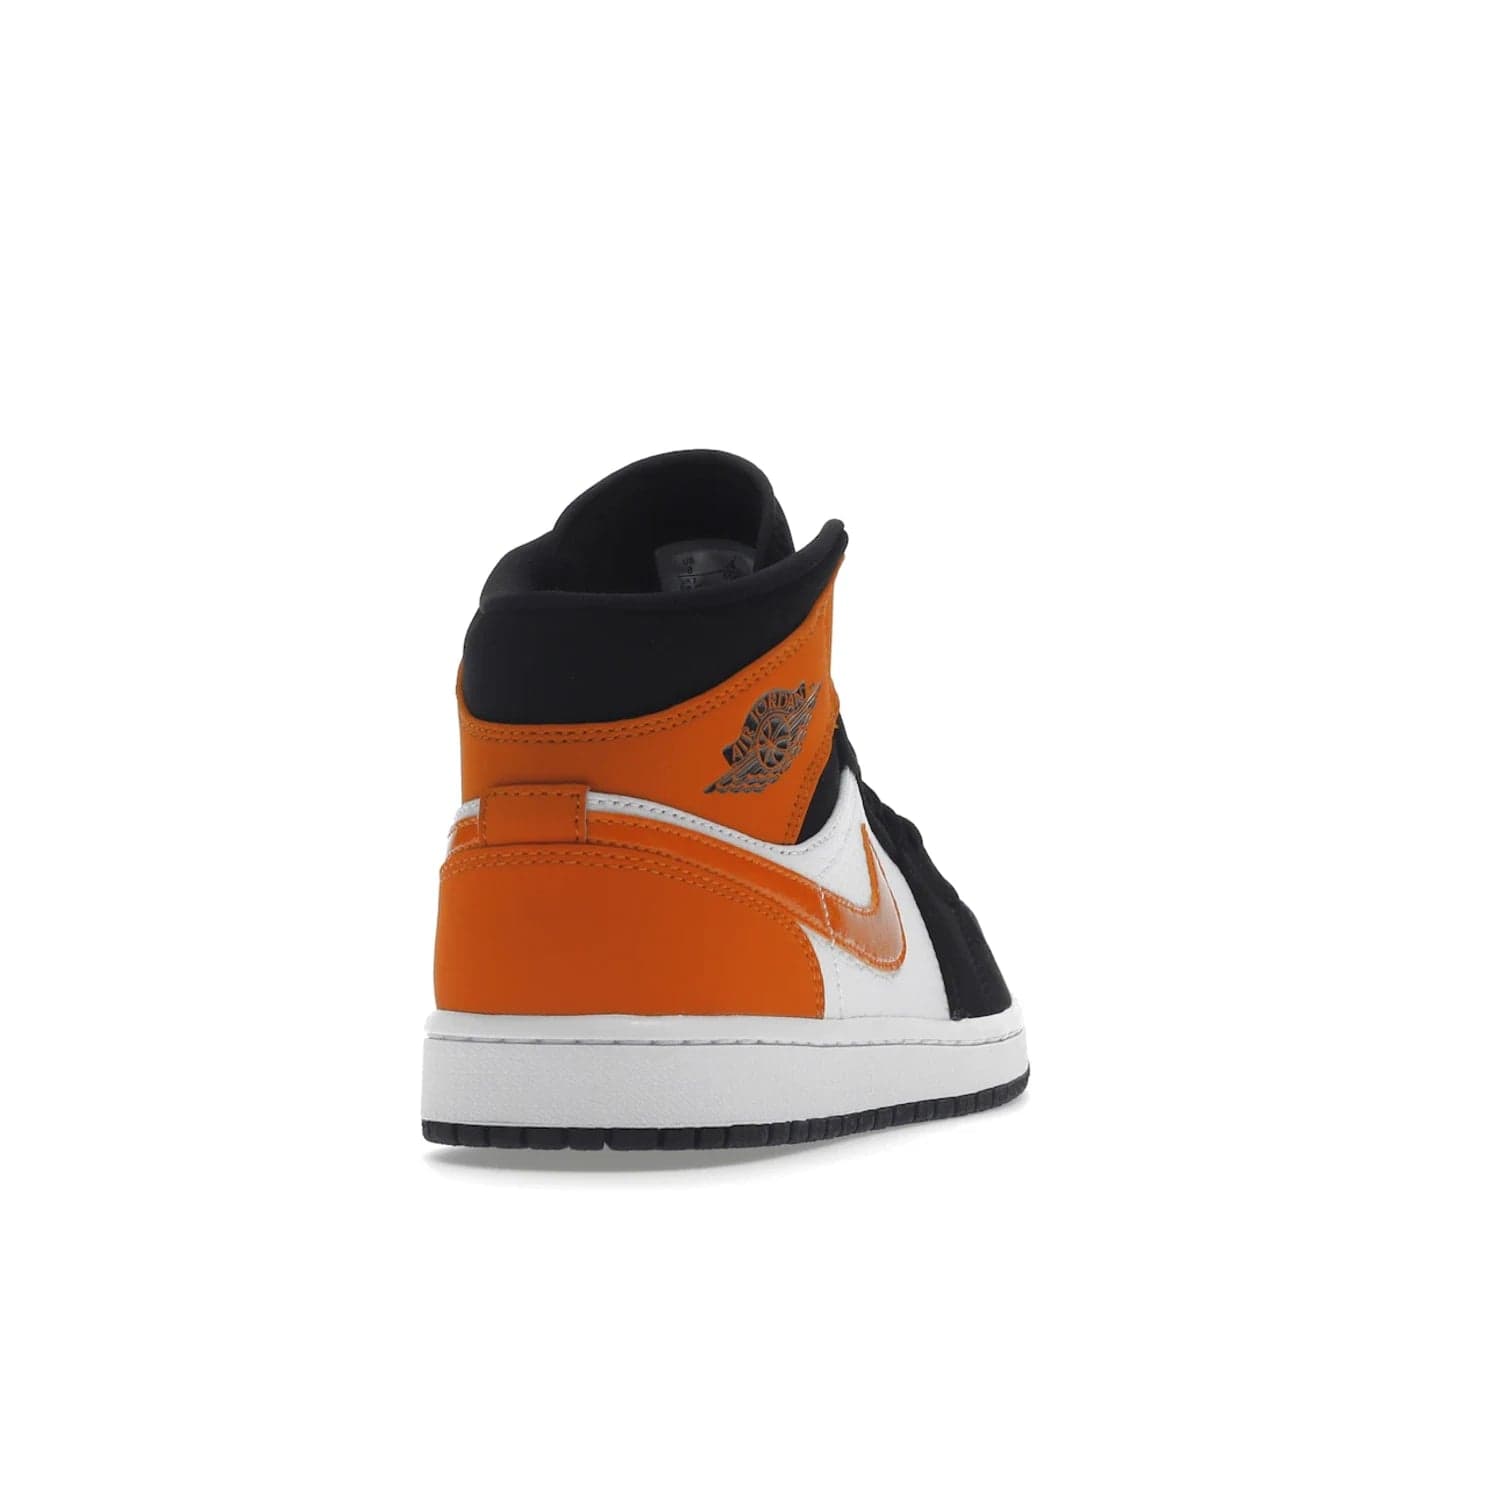 Jordan 1 Mid Shattered Backboard - Image 30 - Only at www.BallersClubKickz.com - The Air Jordan 1 Mid Shattered Backboard offers a timeless Black/White-Starfish colorway. Classic Swoosh logo and AJ insignia plus a shatterd backboard graphic on the insole. Get your pair today!